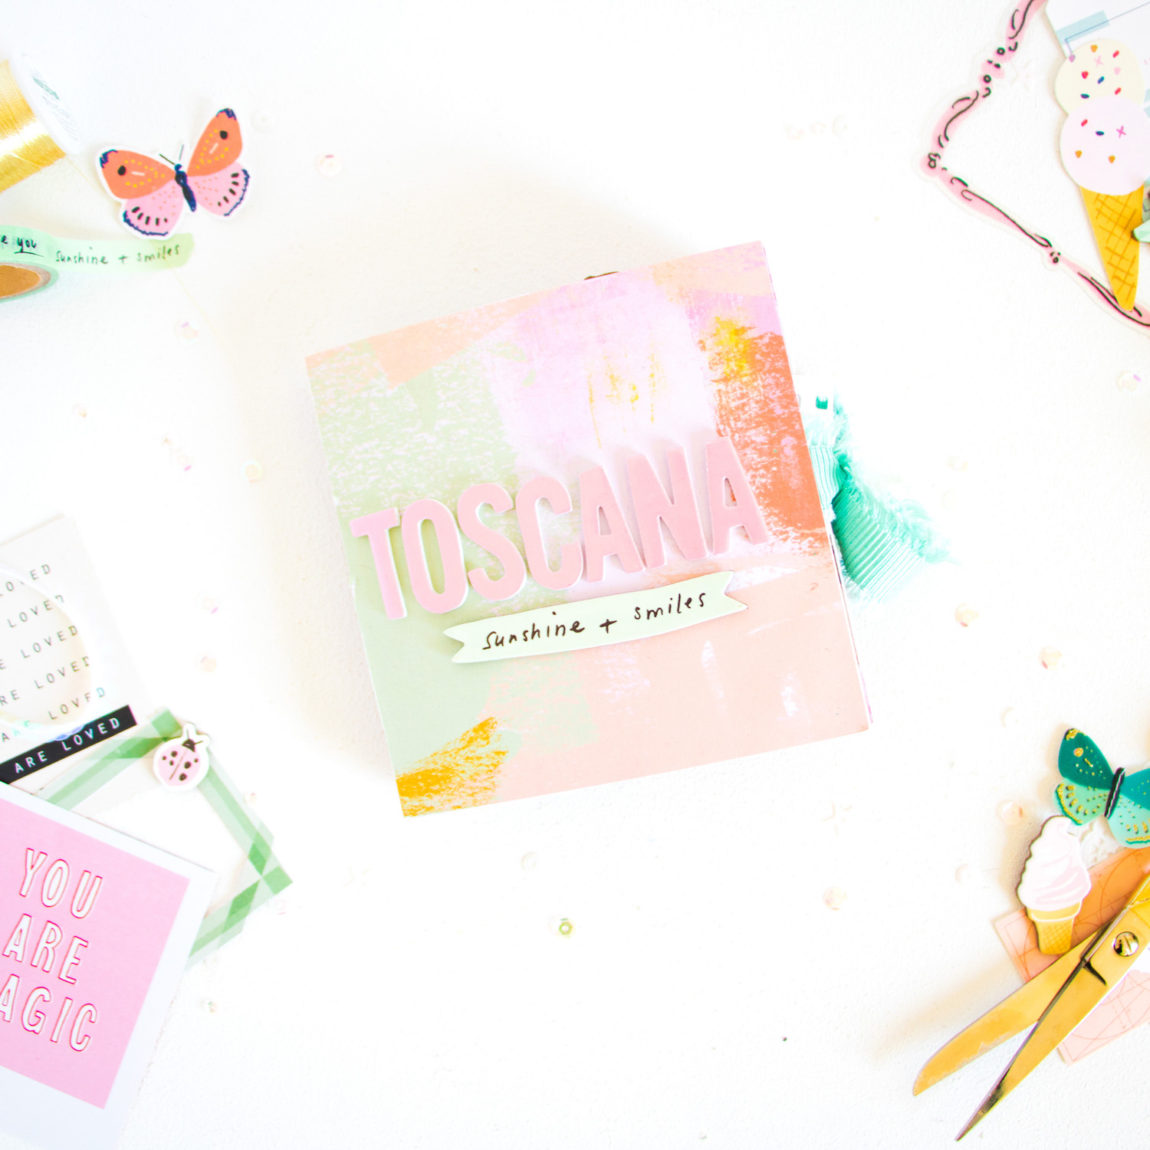 Star Pop-up Mini Album by ScatteredConfetti. // #scrapbooking #cratepaper #maggieholmes